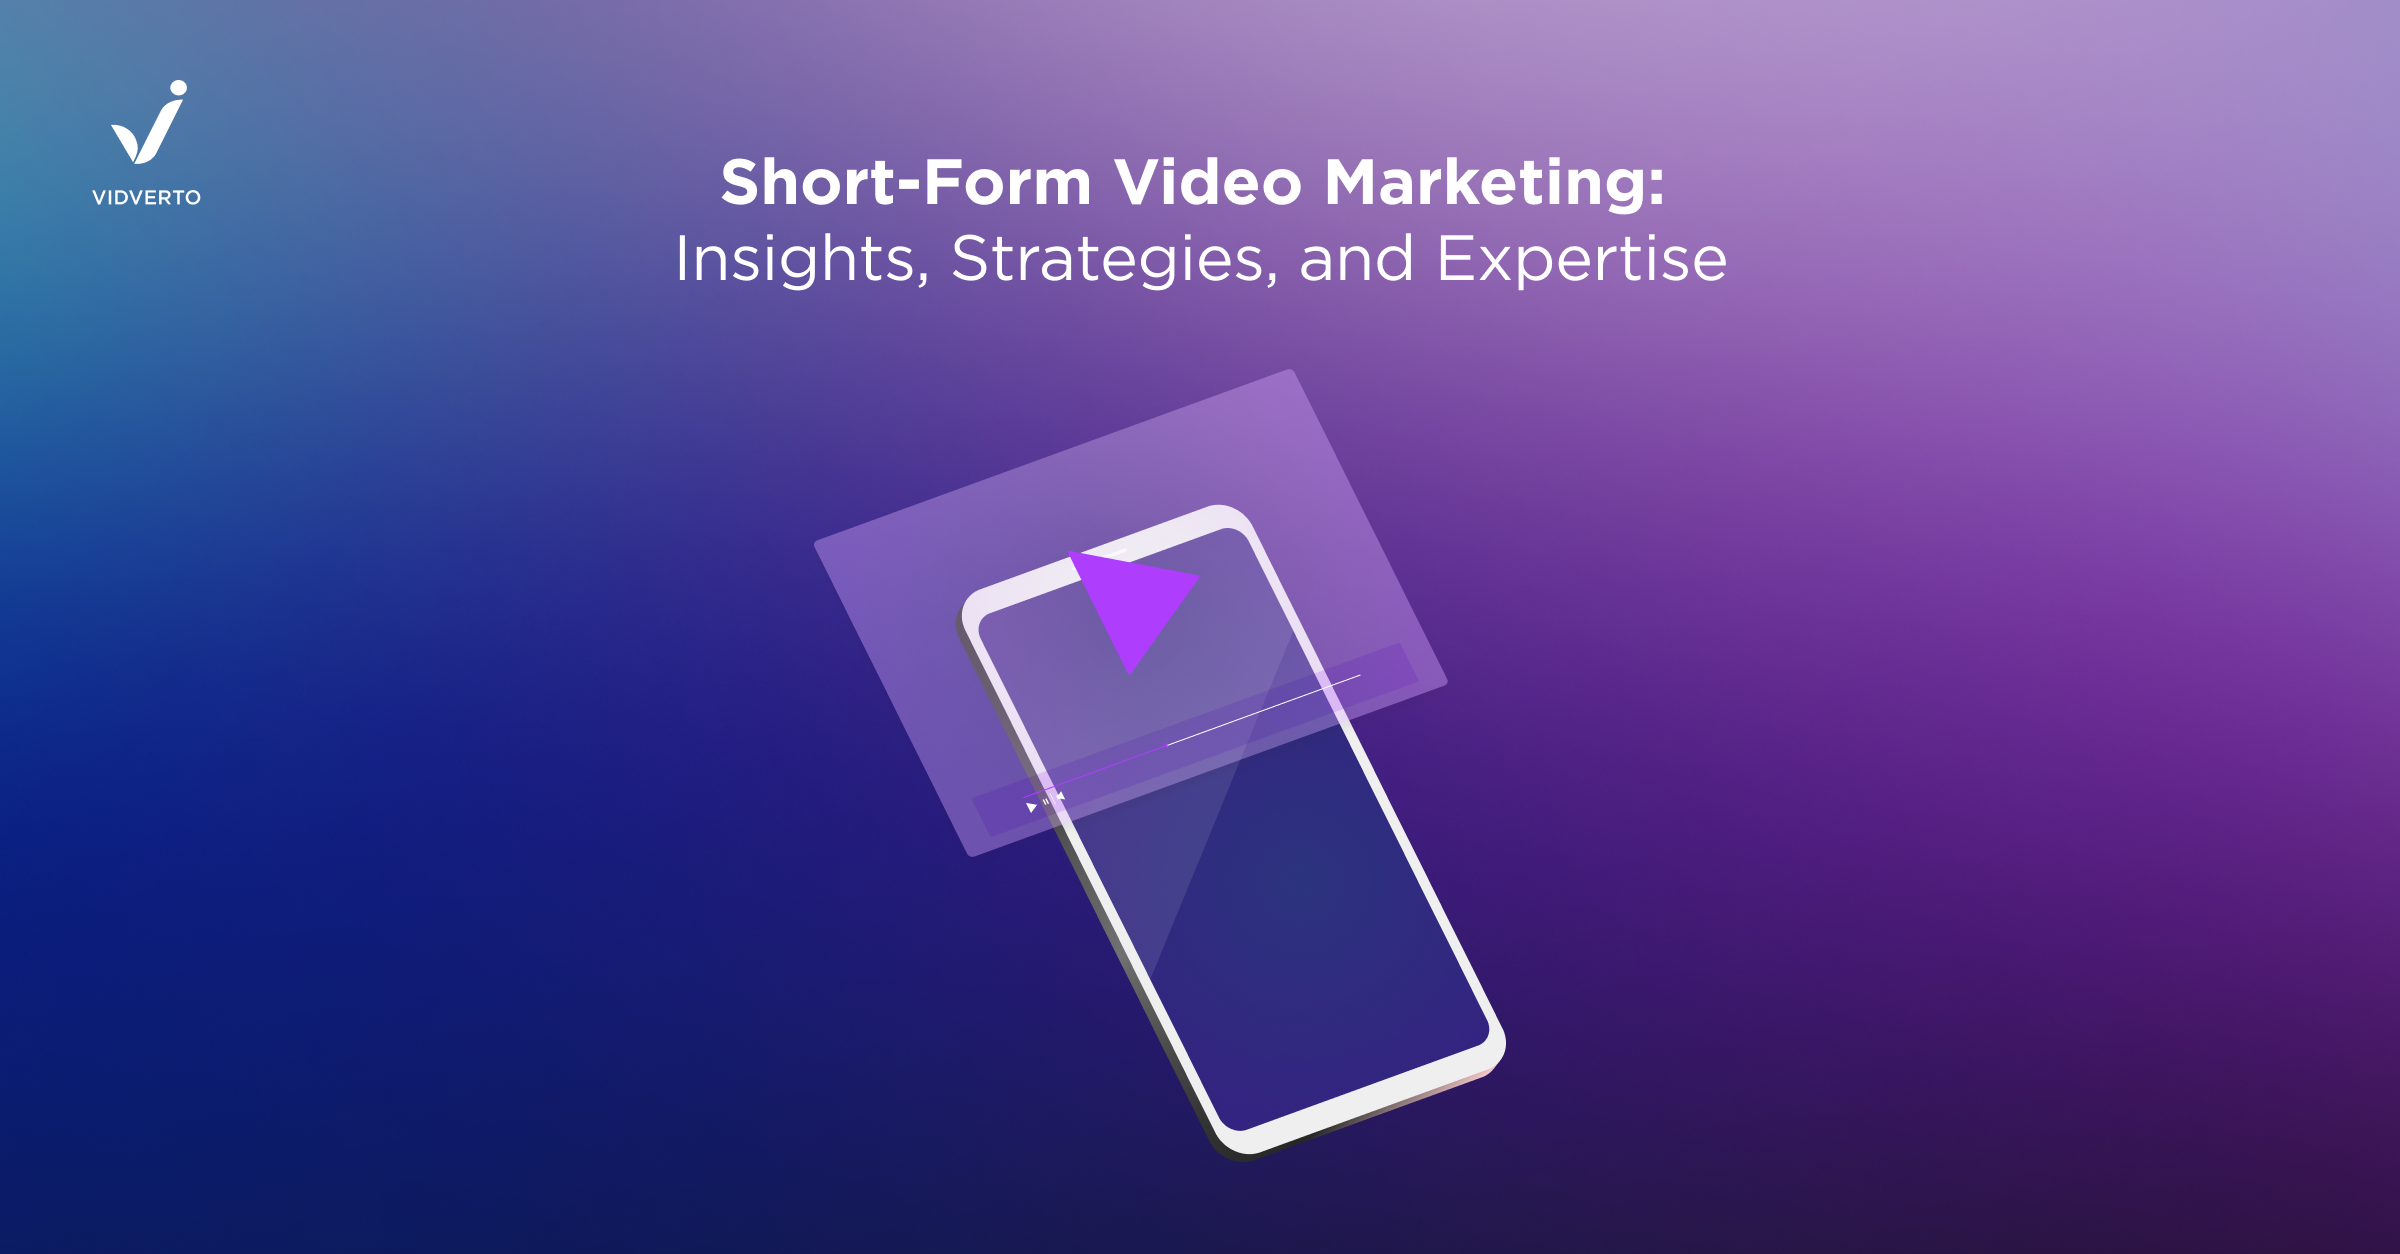 Short-Form Video Marketing: Insights, Strategies, and Expertise